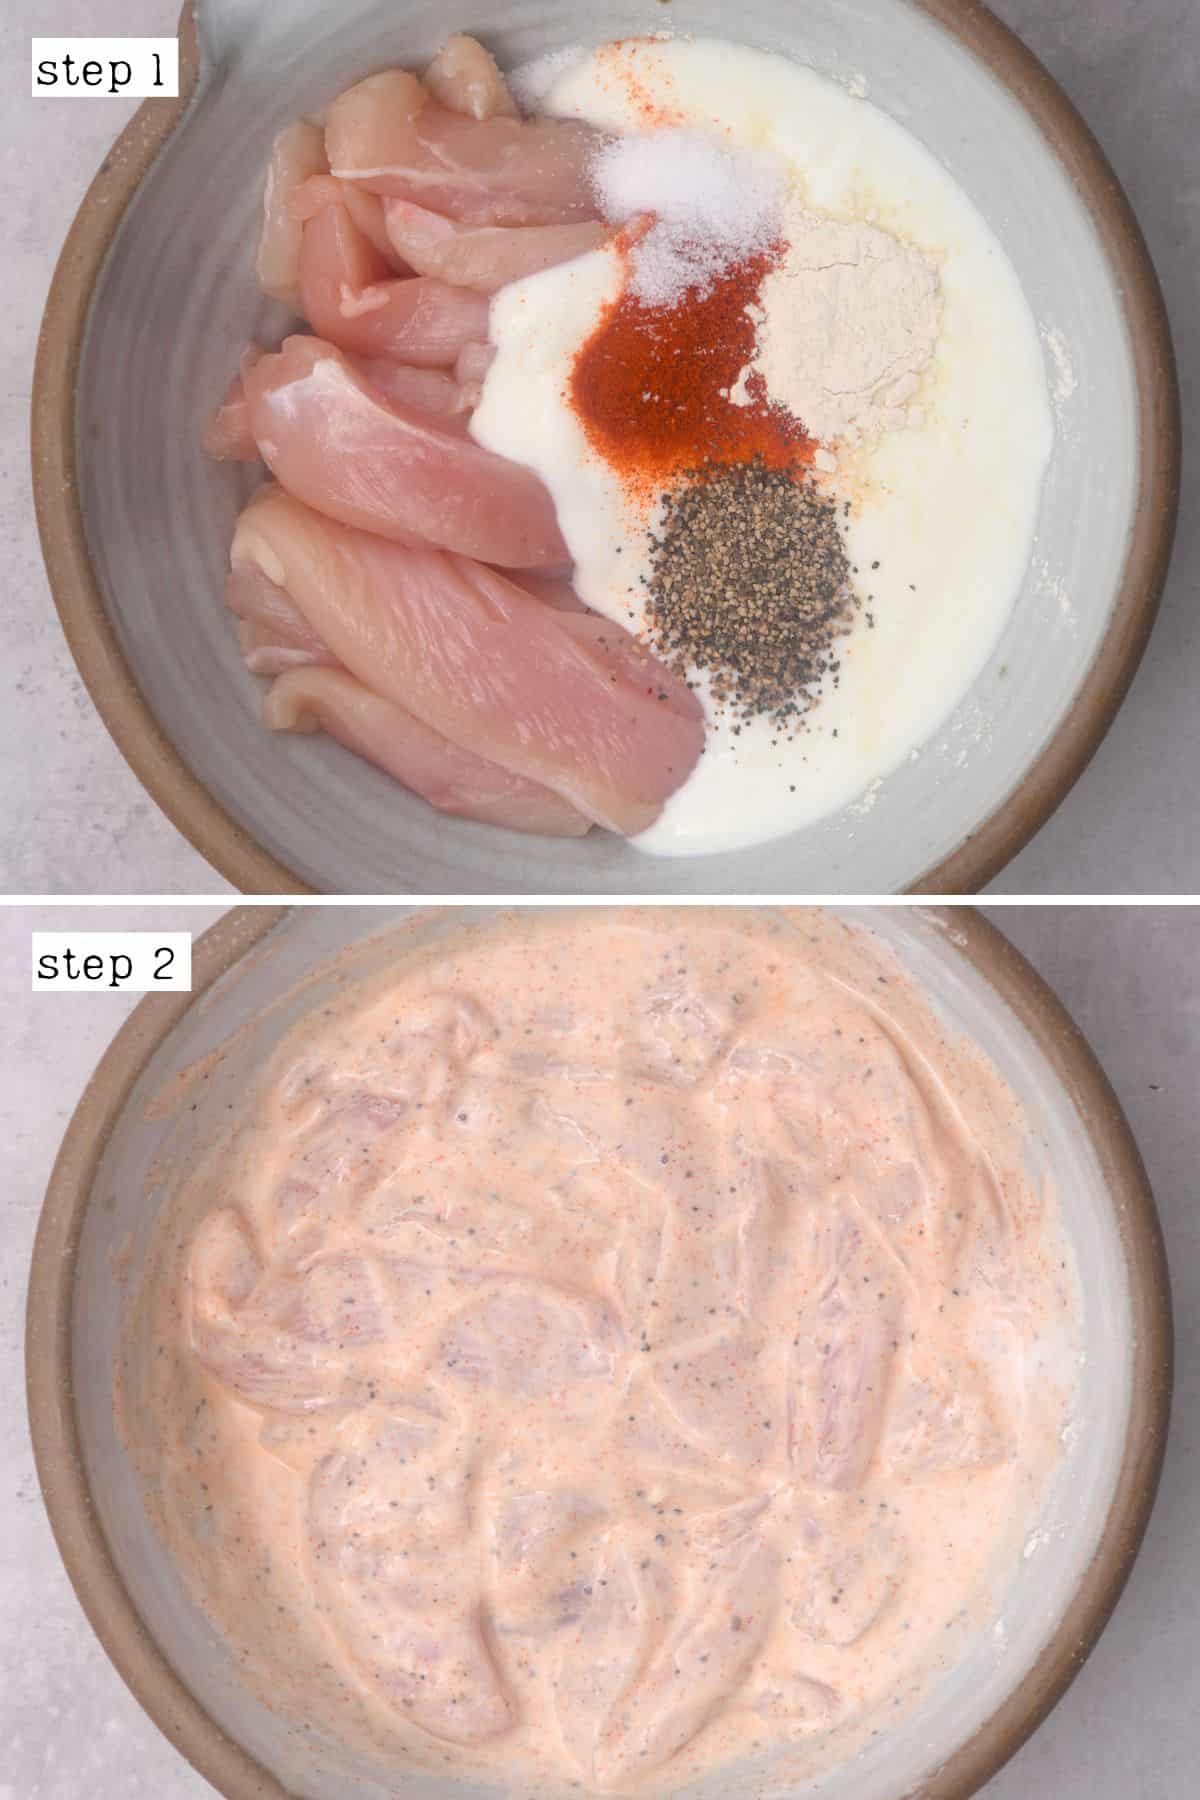 Steps for marinating chicken in spices and buttermilk